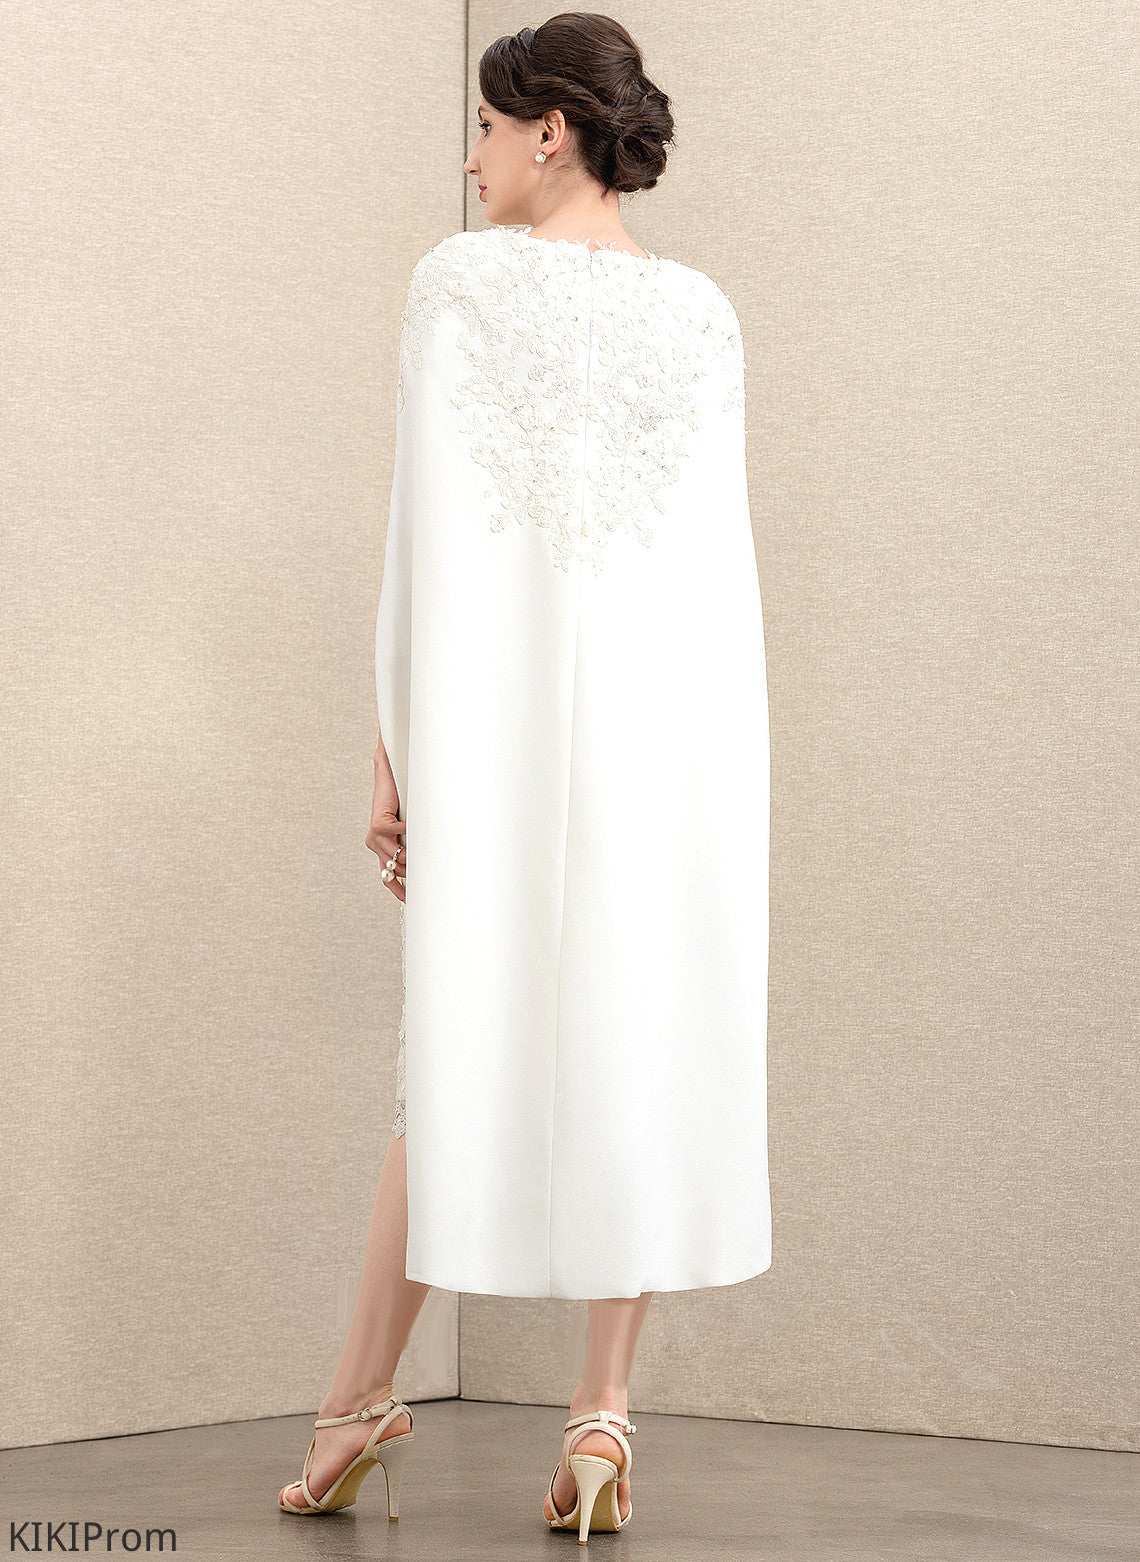 Bride Crepe Stretch the Knee-Length Mother of the Bride Dresses With Beading Rosalind of Mother Sheath/Column Sweetheart Dress Lace